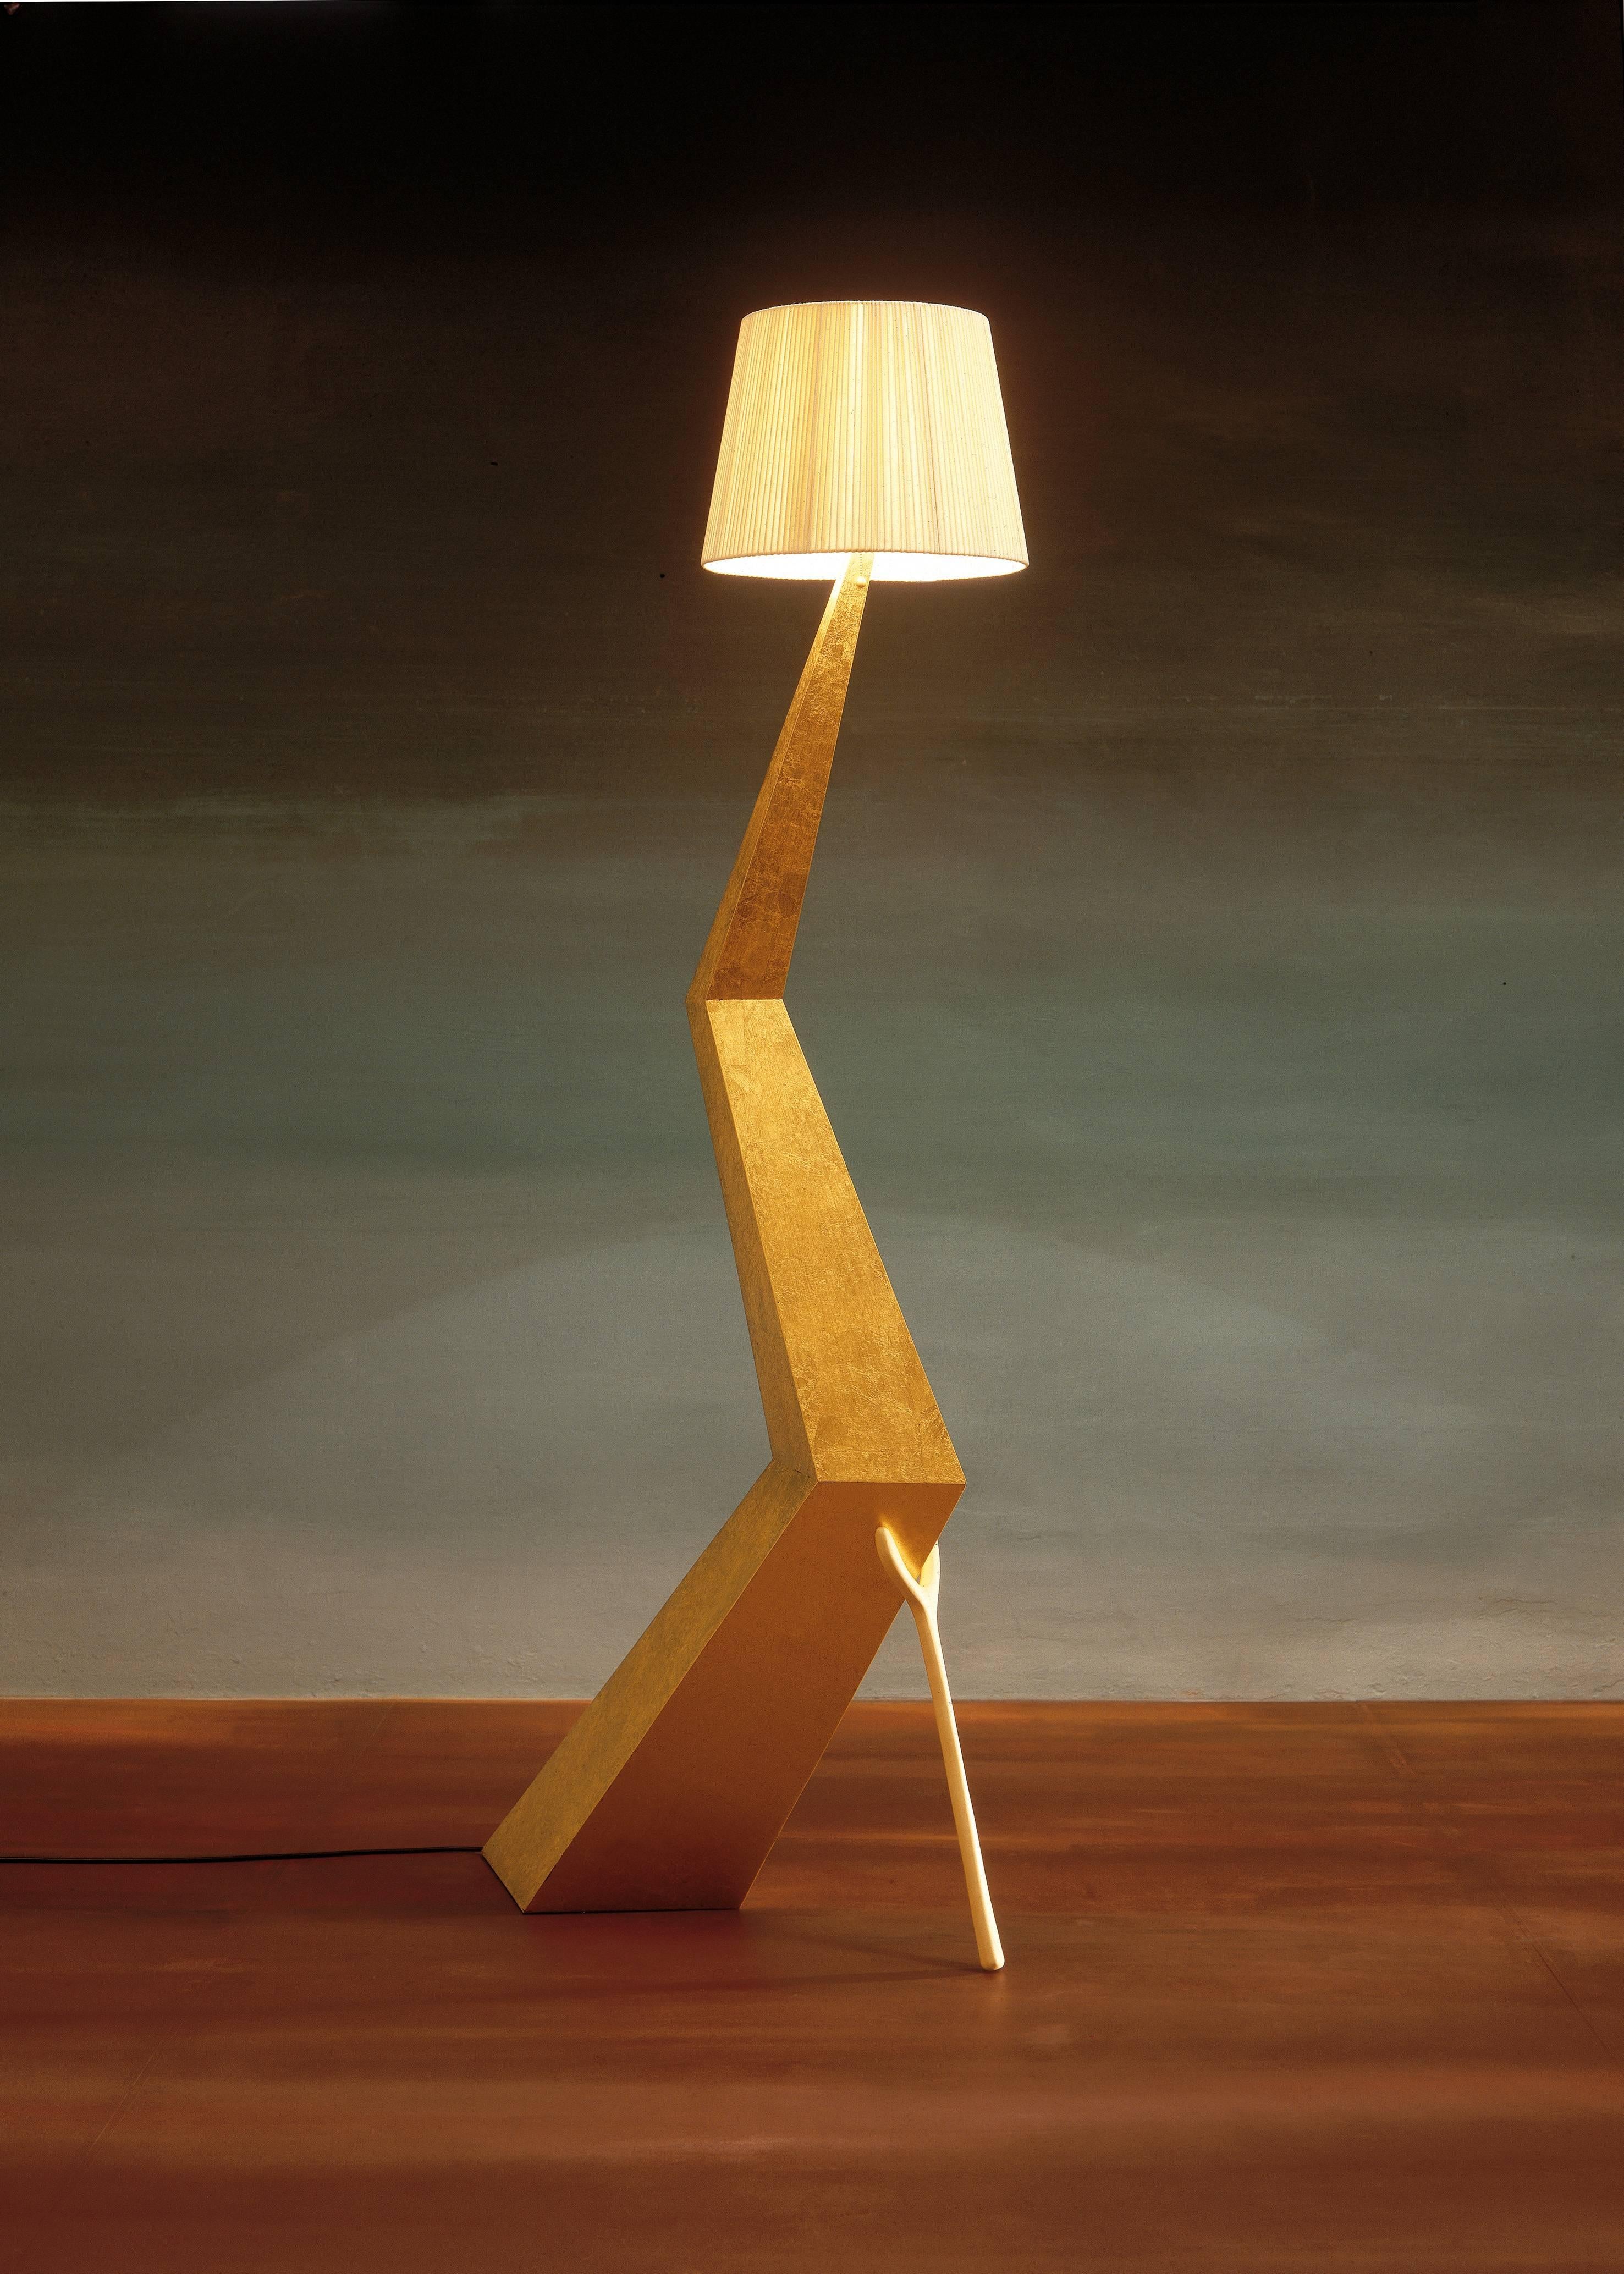 Braceli lamp designed by Salvador Dali manufactured by BD furniture in Barcelona.

Bracelli
panel structure covered with silver plated polyester painting (Fine gold leaf).
Lampshade in ivory cotton and rayon.  

Measures: 37 x 64 x 180 H